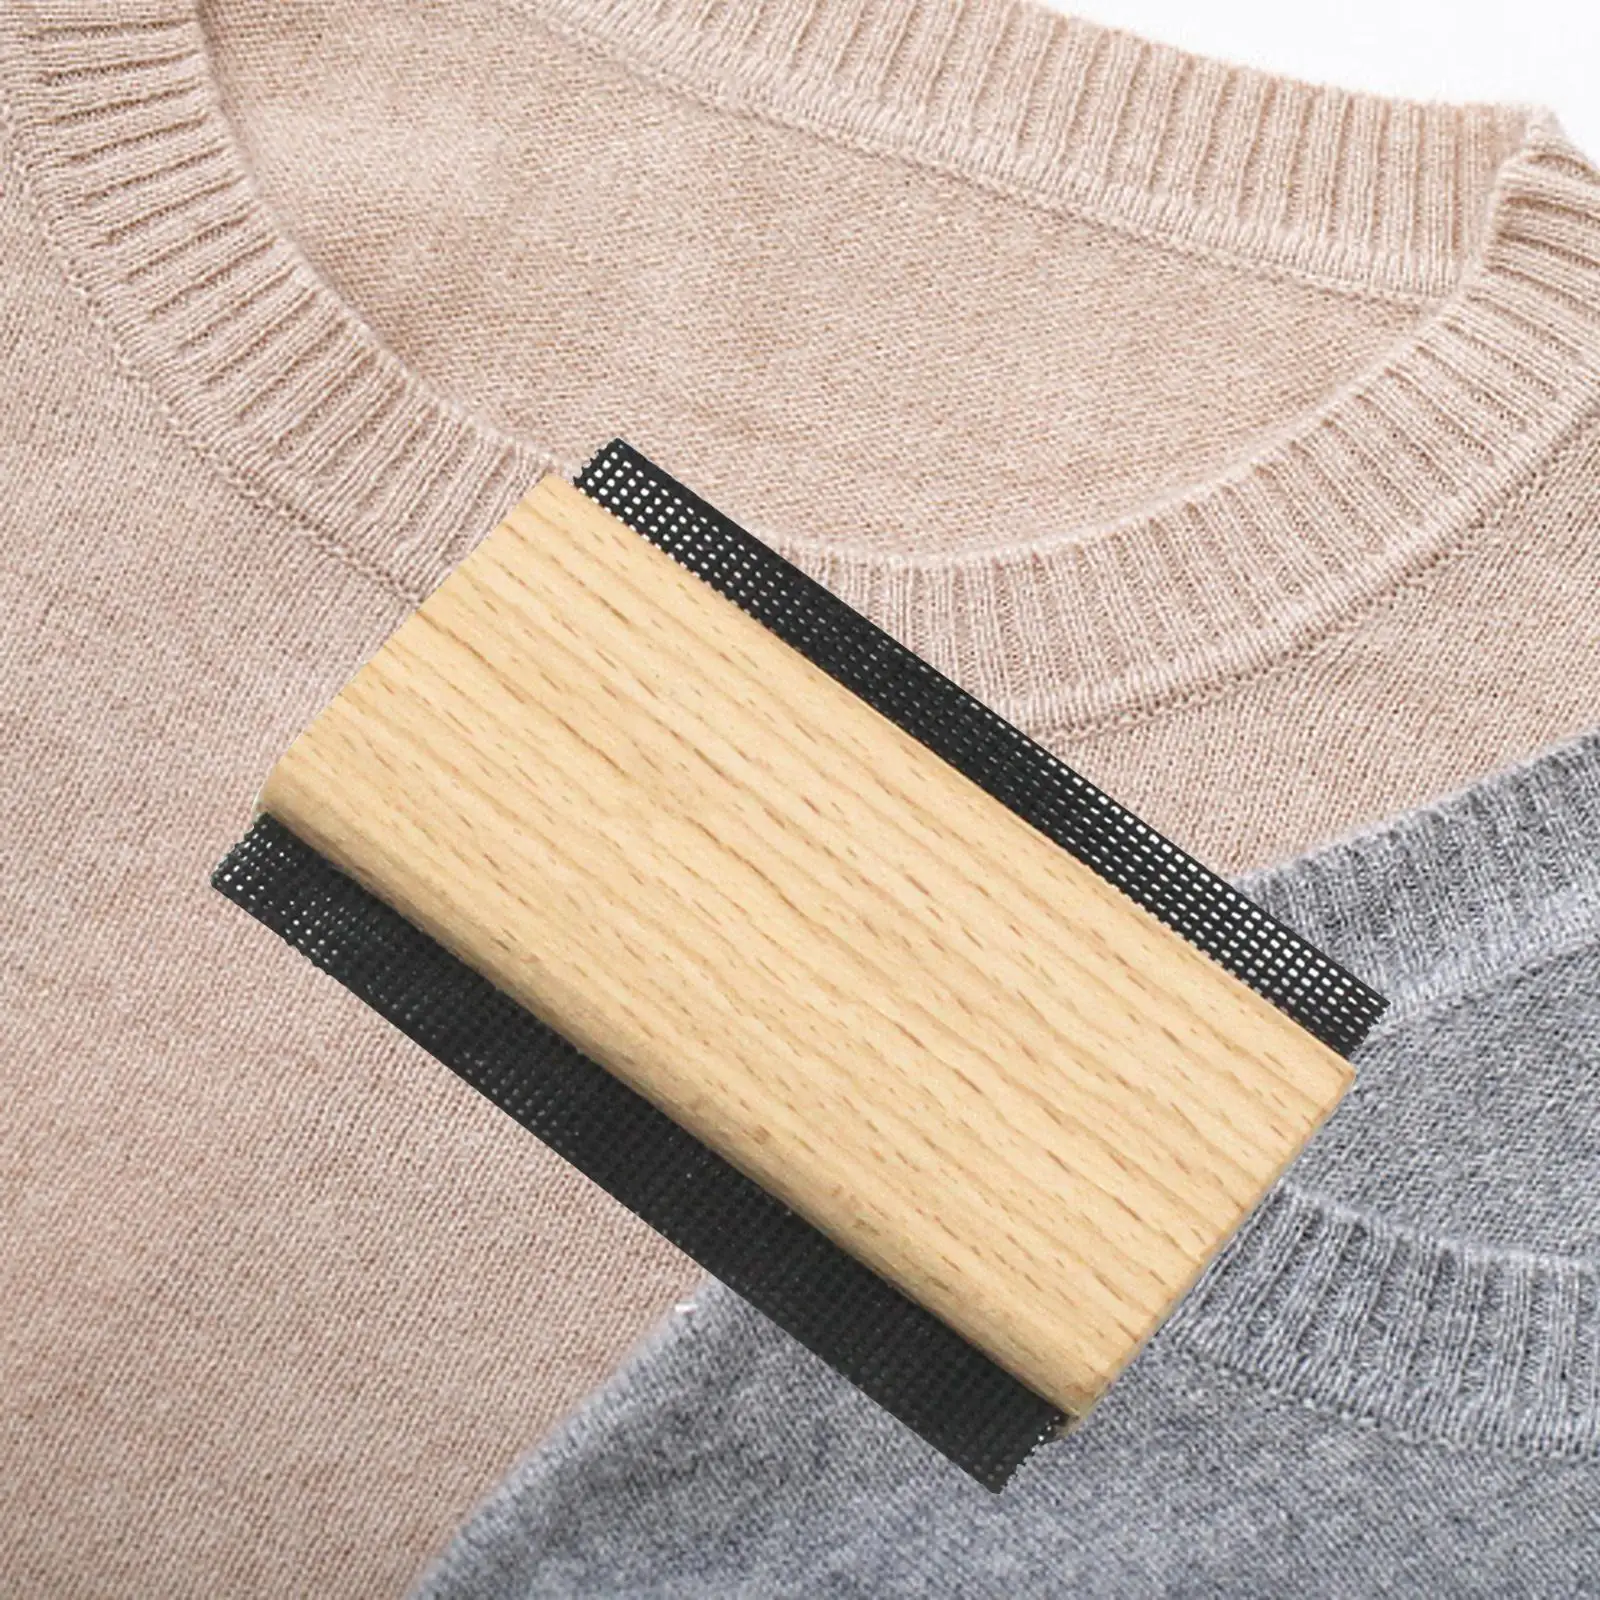 Portable Sweater Shaver Wool Comb Cleaner Fabric Lint Remover Double Sided Cashmere Comb for Clothes Home Coats Pants Removing